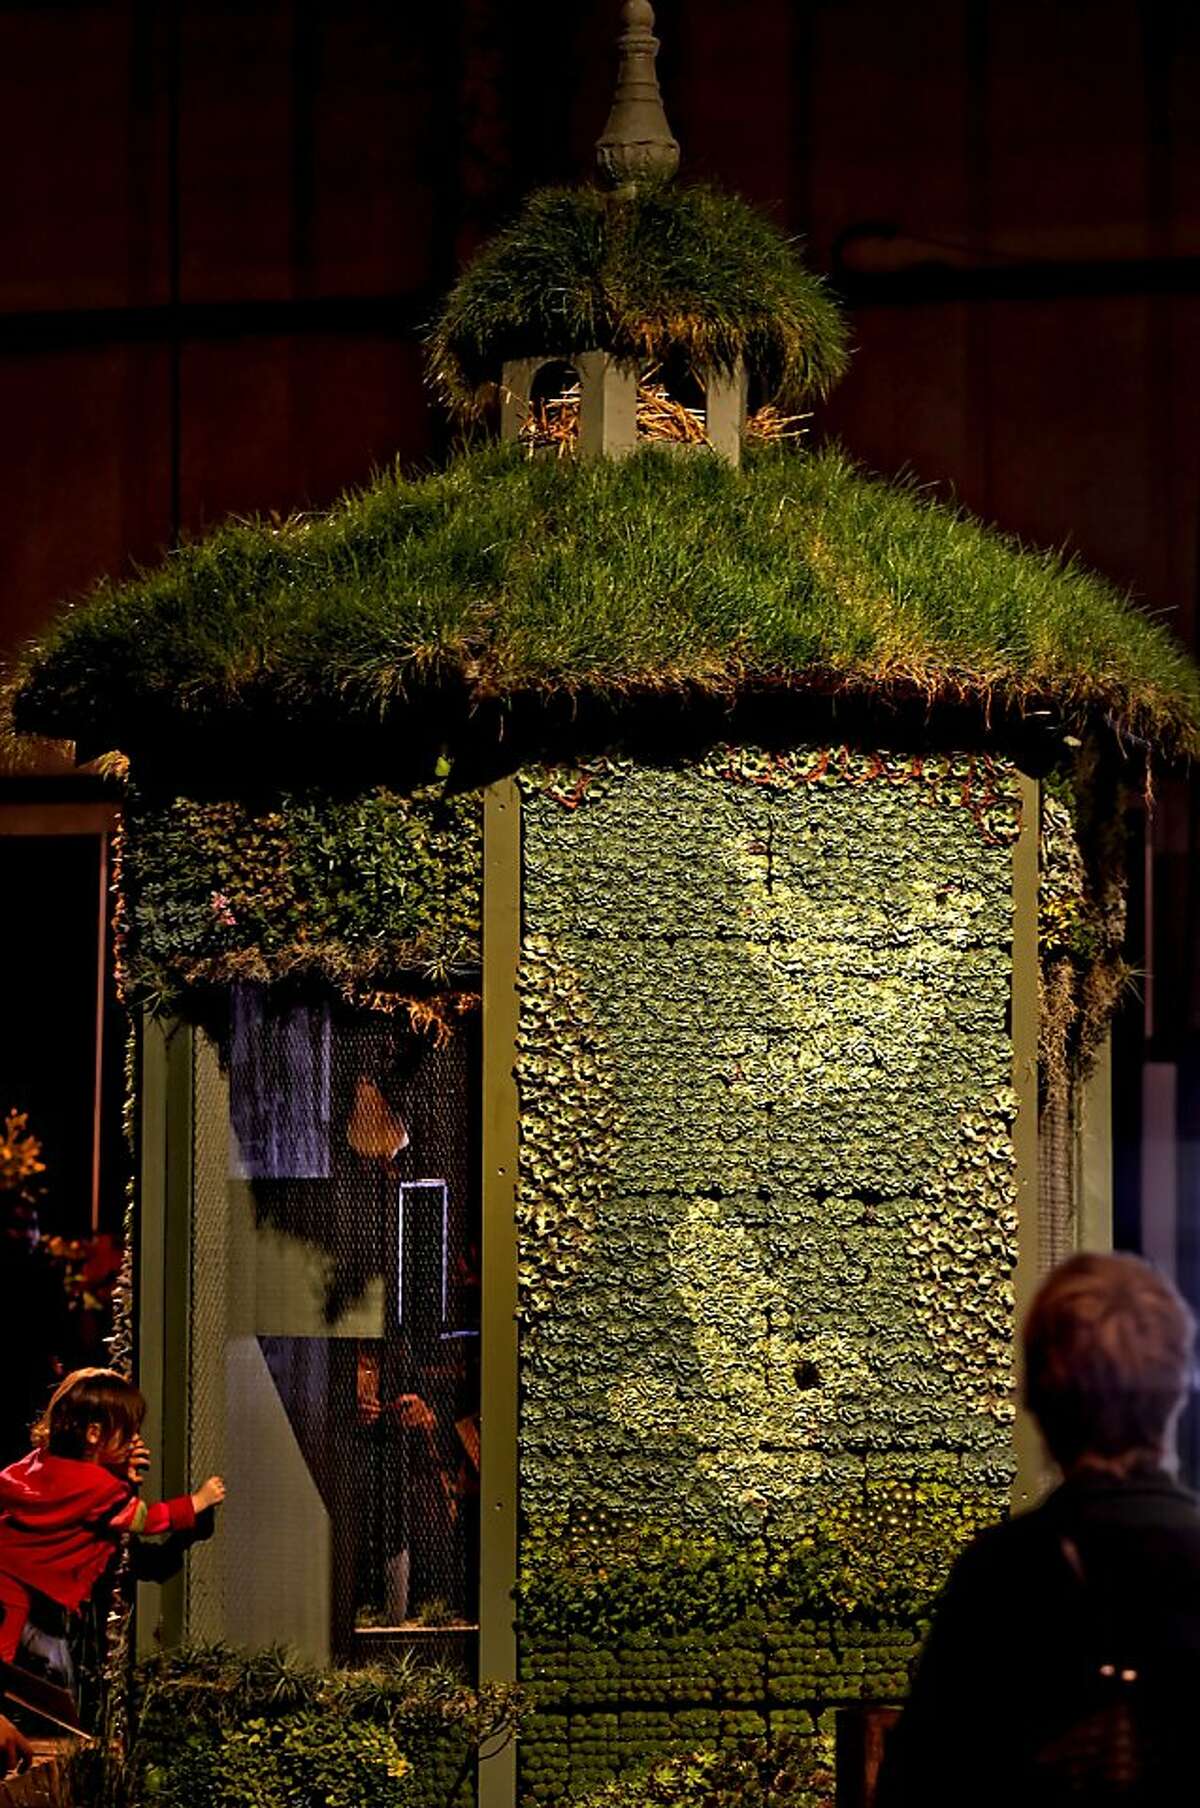 A spectacular, Dove House, covered with hundres of succulents and topped with grasses, The Garden Route's, "A Garden of Life", at the San Francisco Flower and Garden show at the Event Center on Saturday Mar. 26, 2011, in San Mateo, Ca.